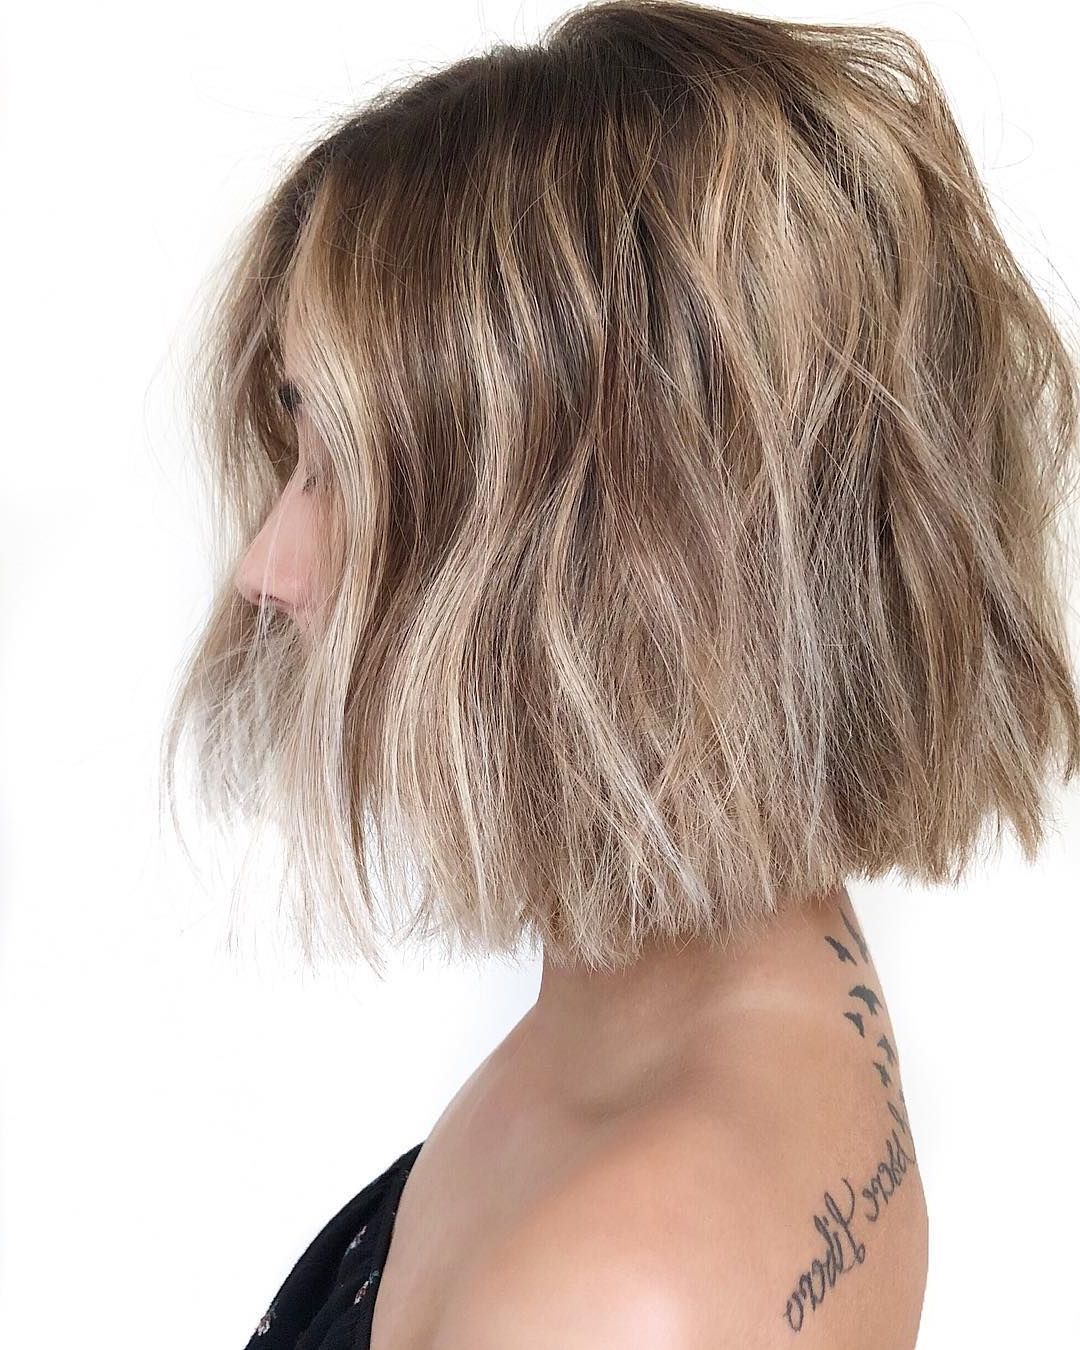 Messy Bob Hairstyles And Haircuts, Female Hairstyle For In Best And Newest Trendy Messy Bob Hairstyles (View 1 of 20)